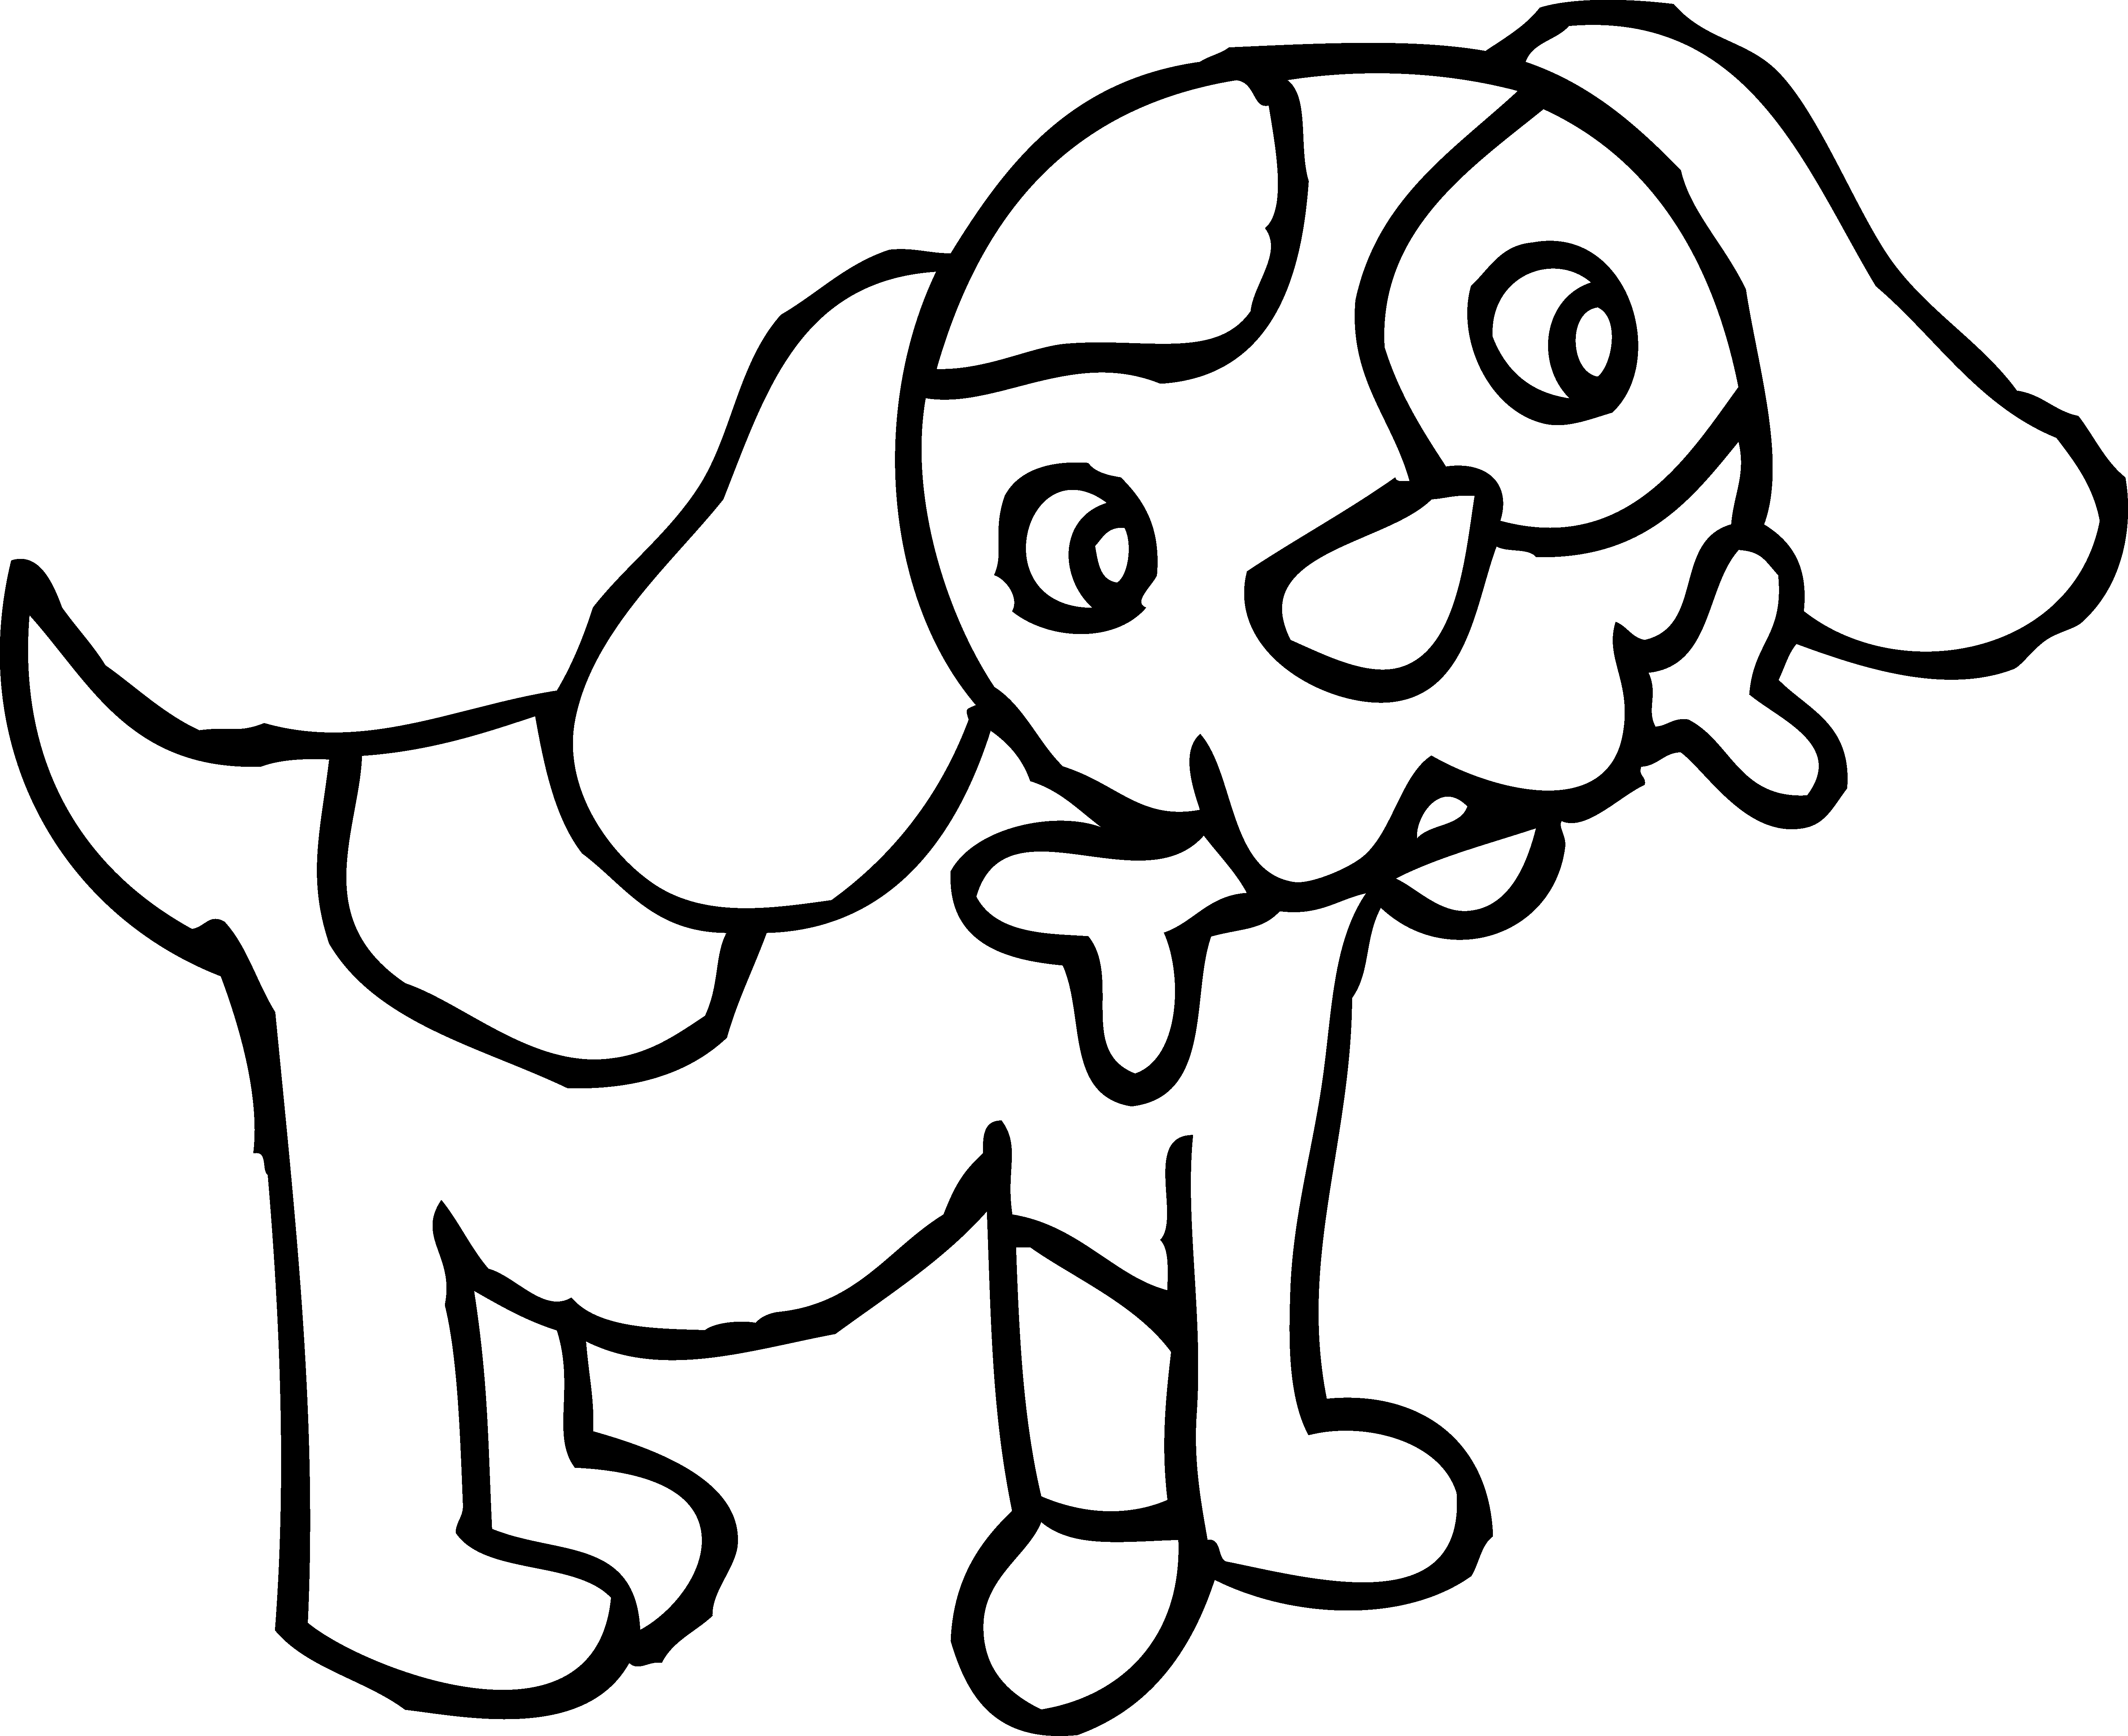 Puppy Clipart Black And White & Puppy Black And White Clip Art.